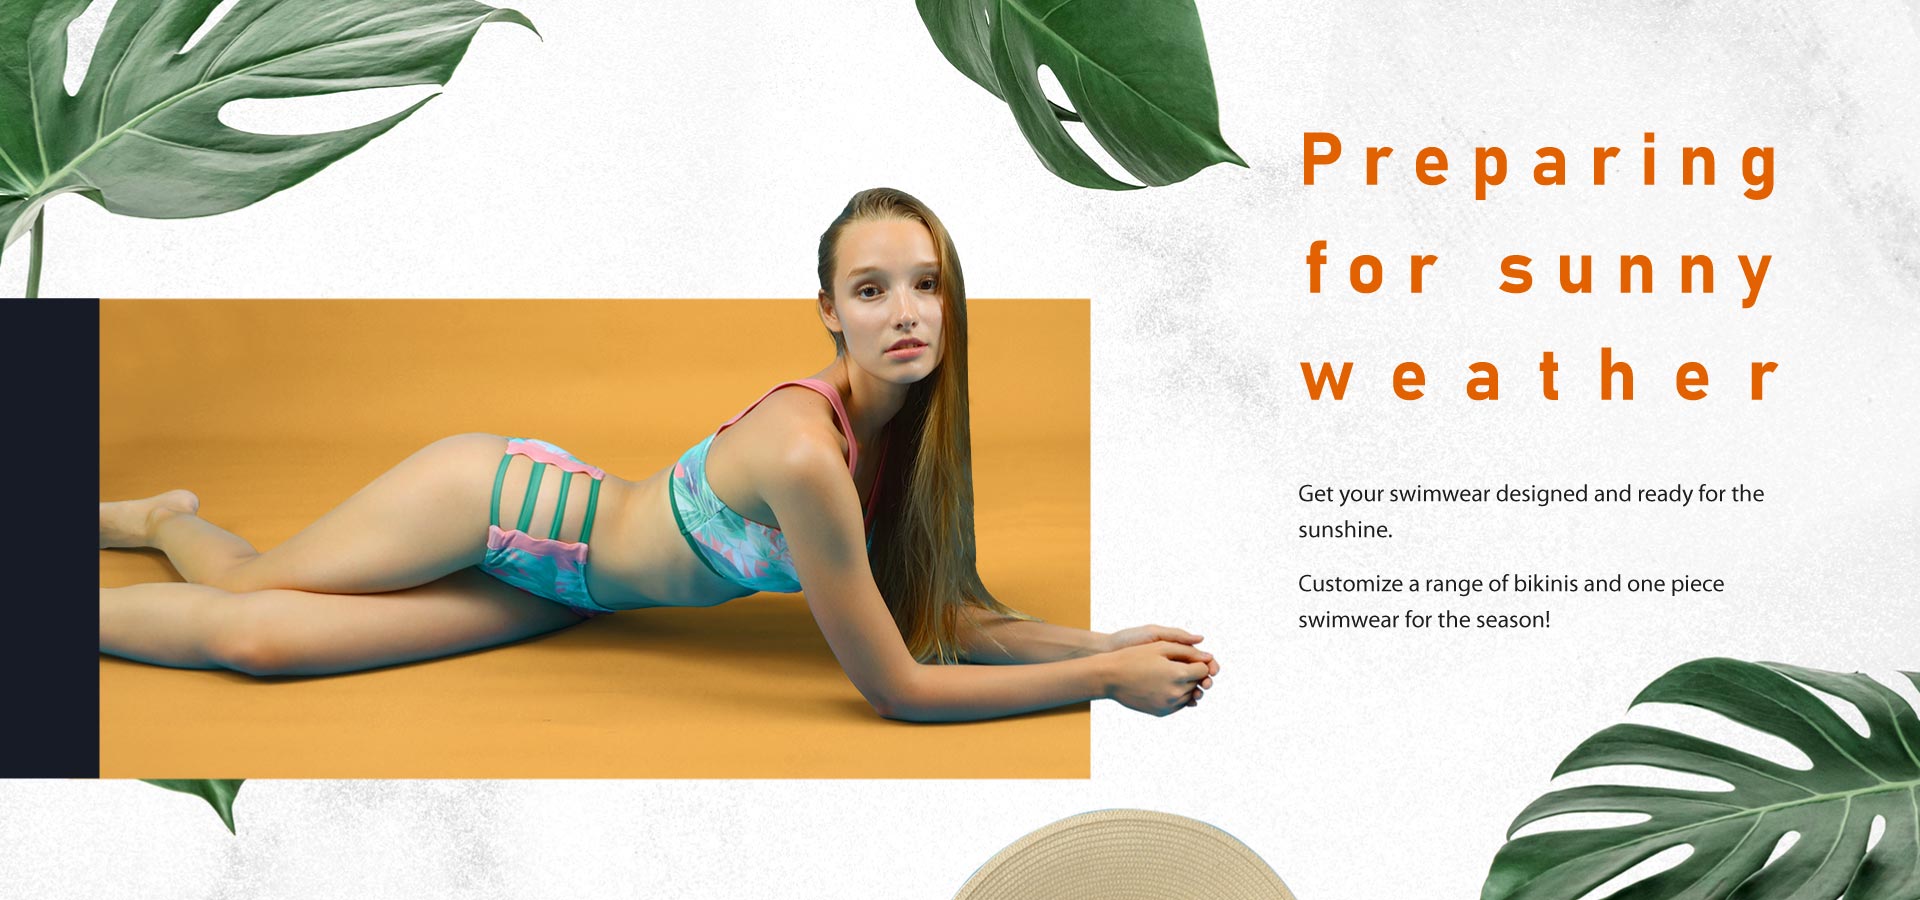 Design your own swimwear: $17 with Free International Shipping